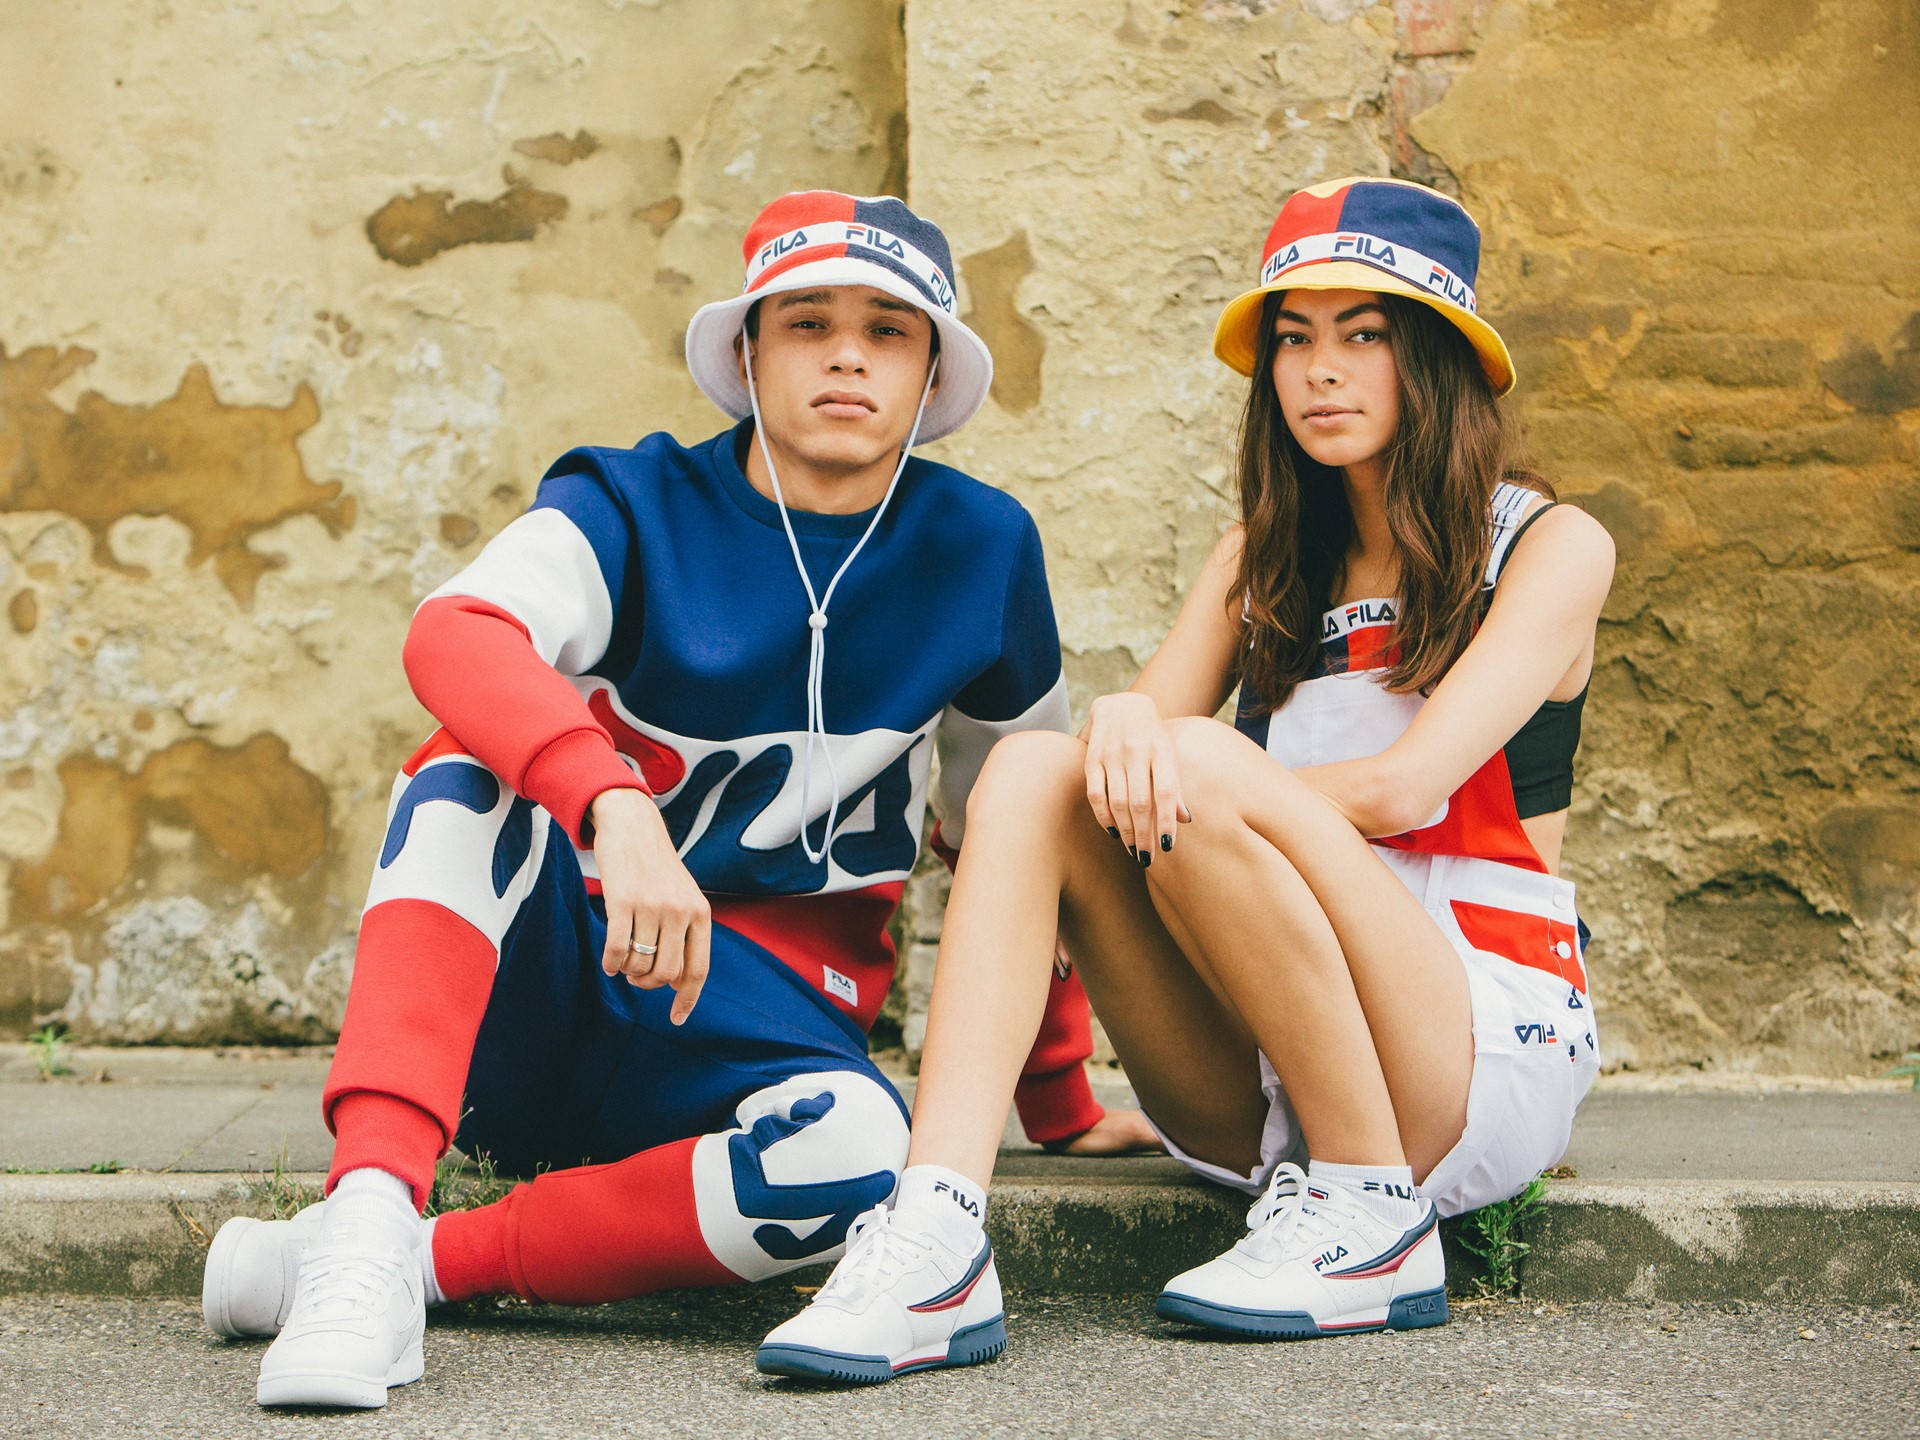 Fila Couple Outfit Wallpaper